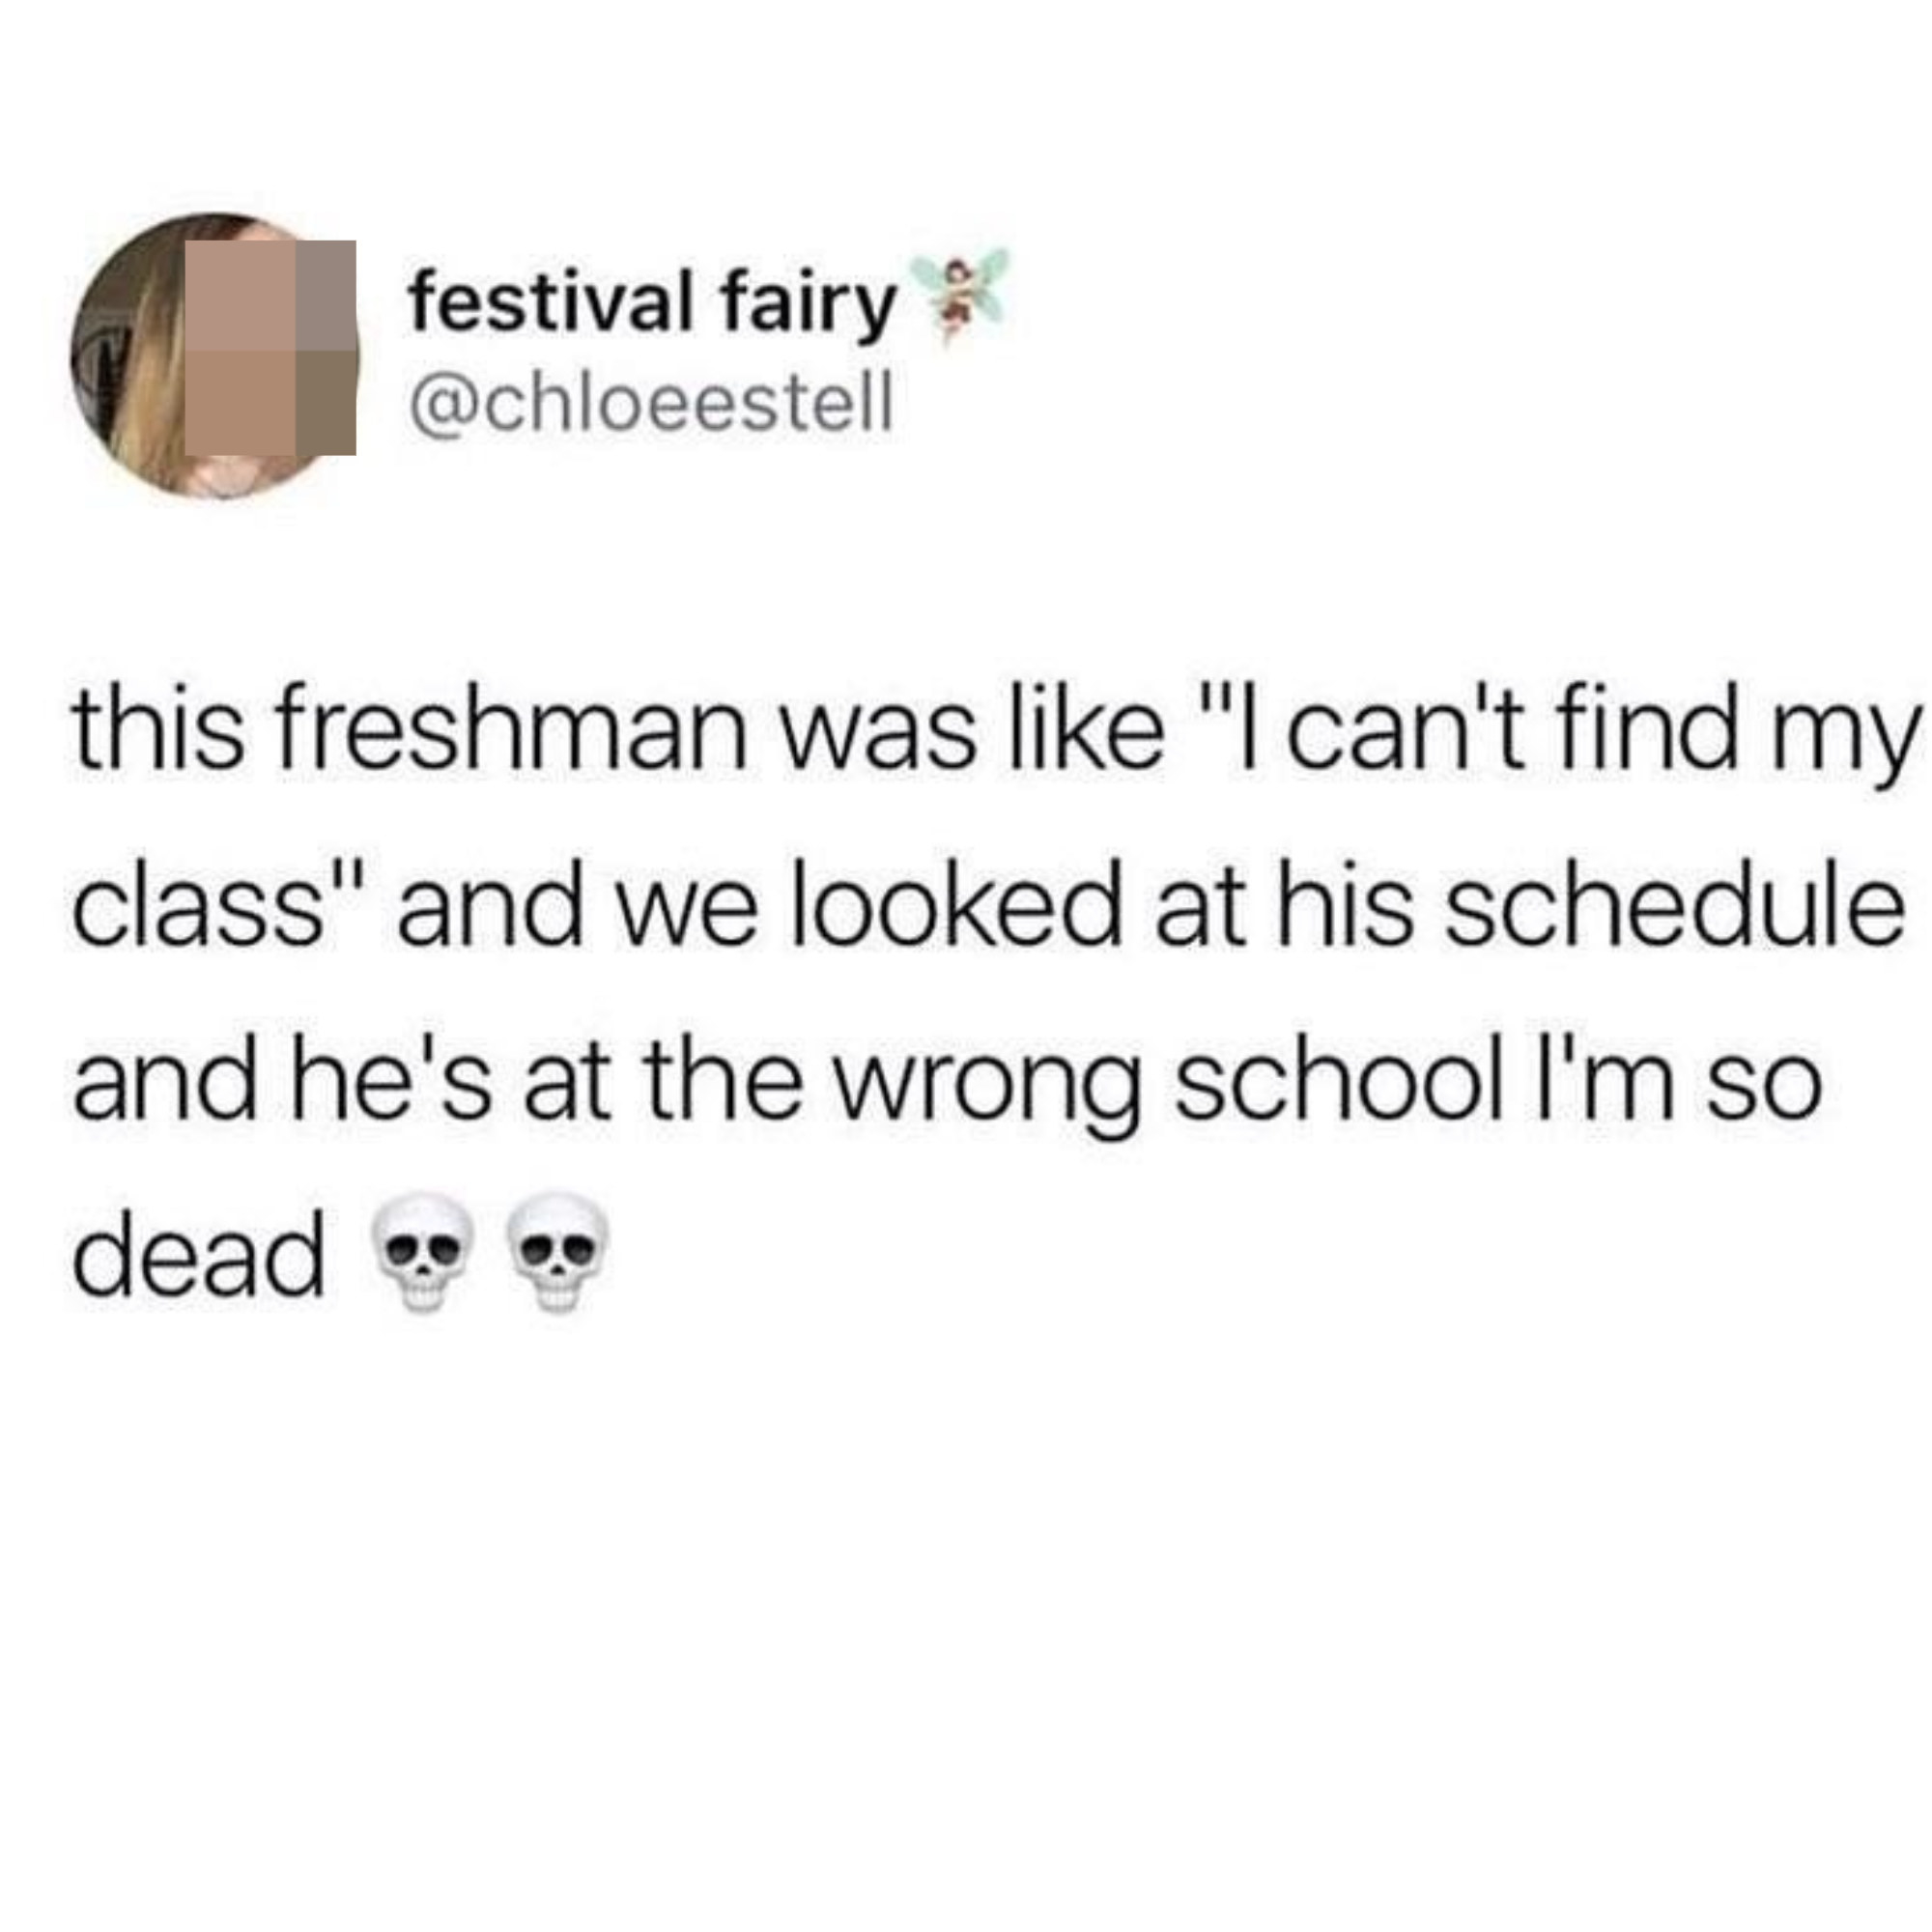 Tweet reading, &quot;This freshman was like &#x27;I cant find my class&#x27; and we looked at his schedule and he&#x27;s at the wrong school&quot;